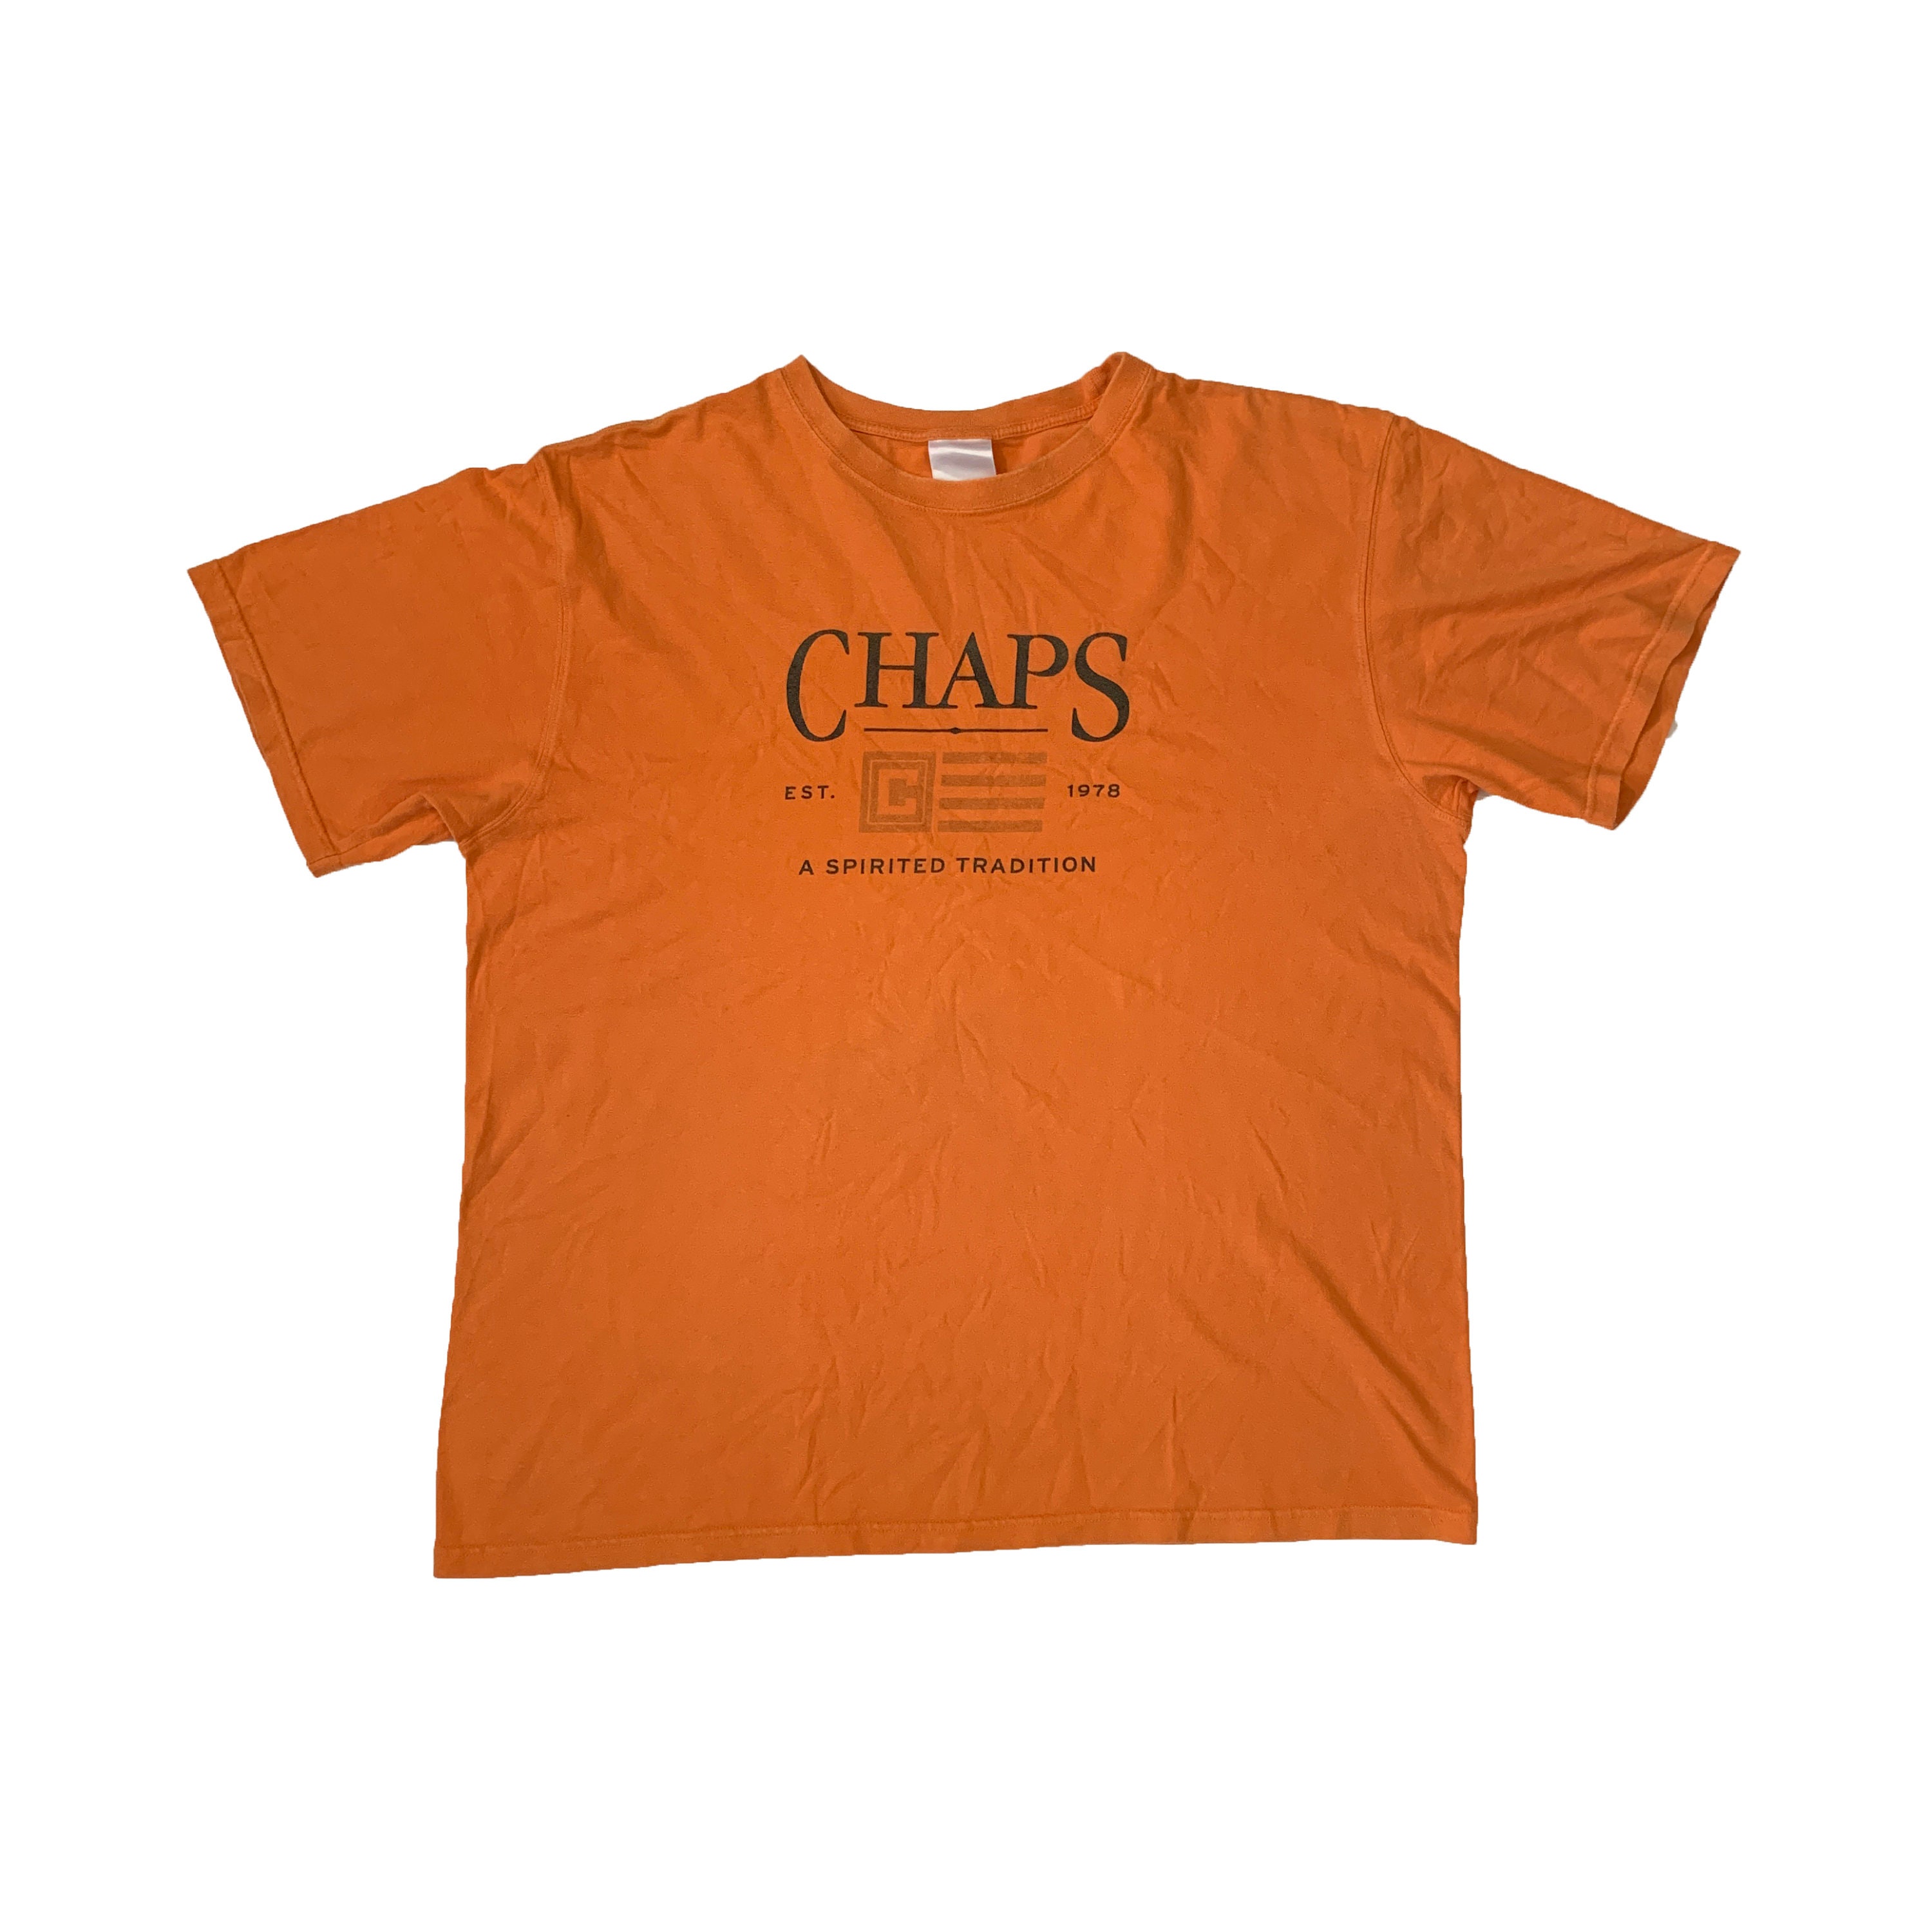 Vintage Chaps T-shirt by Ralph Lauren A Spirited Tradition Rare